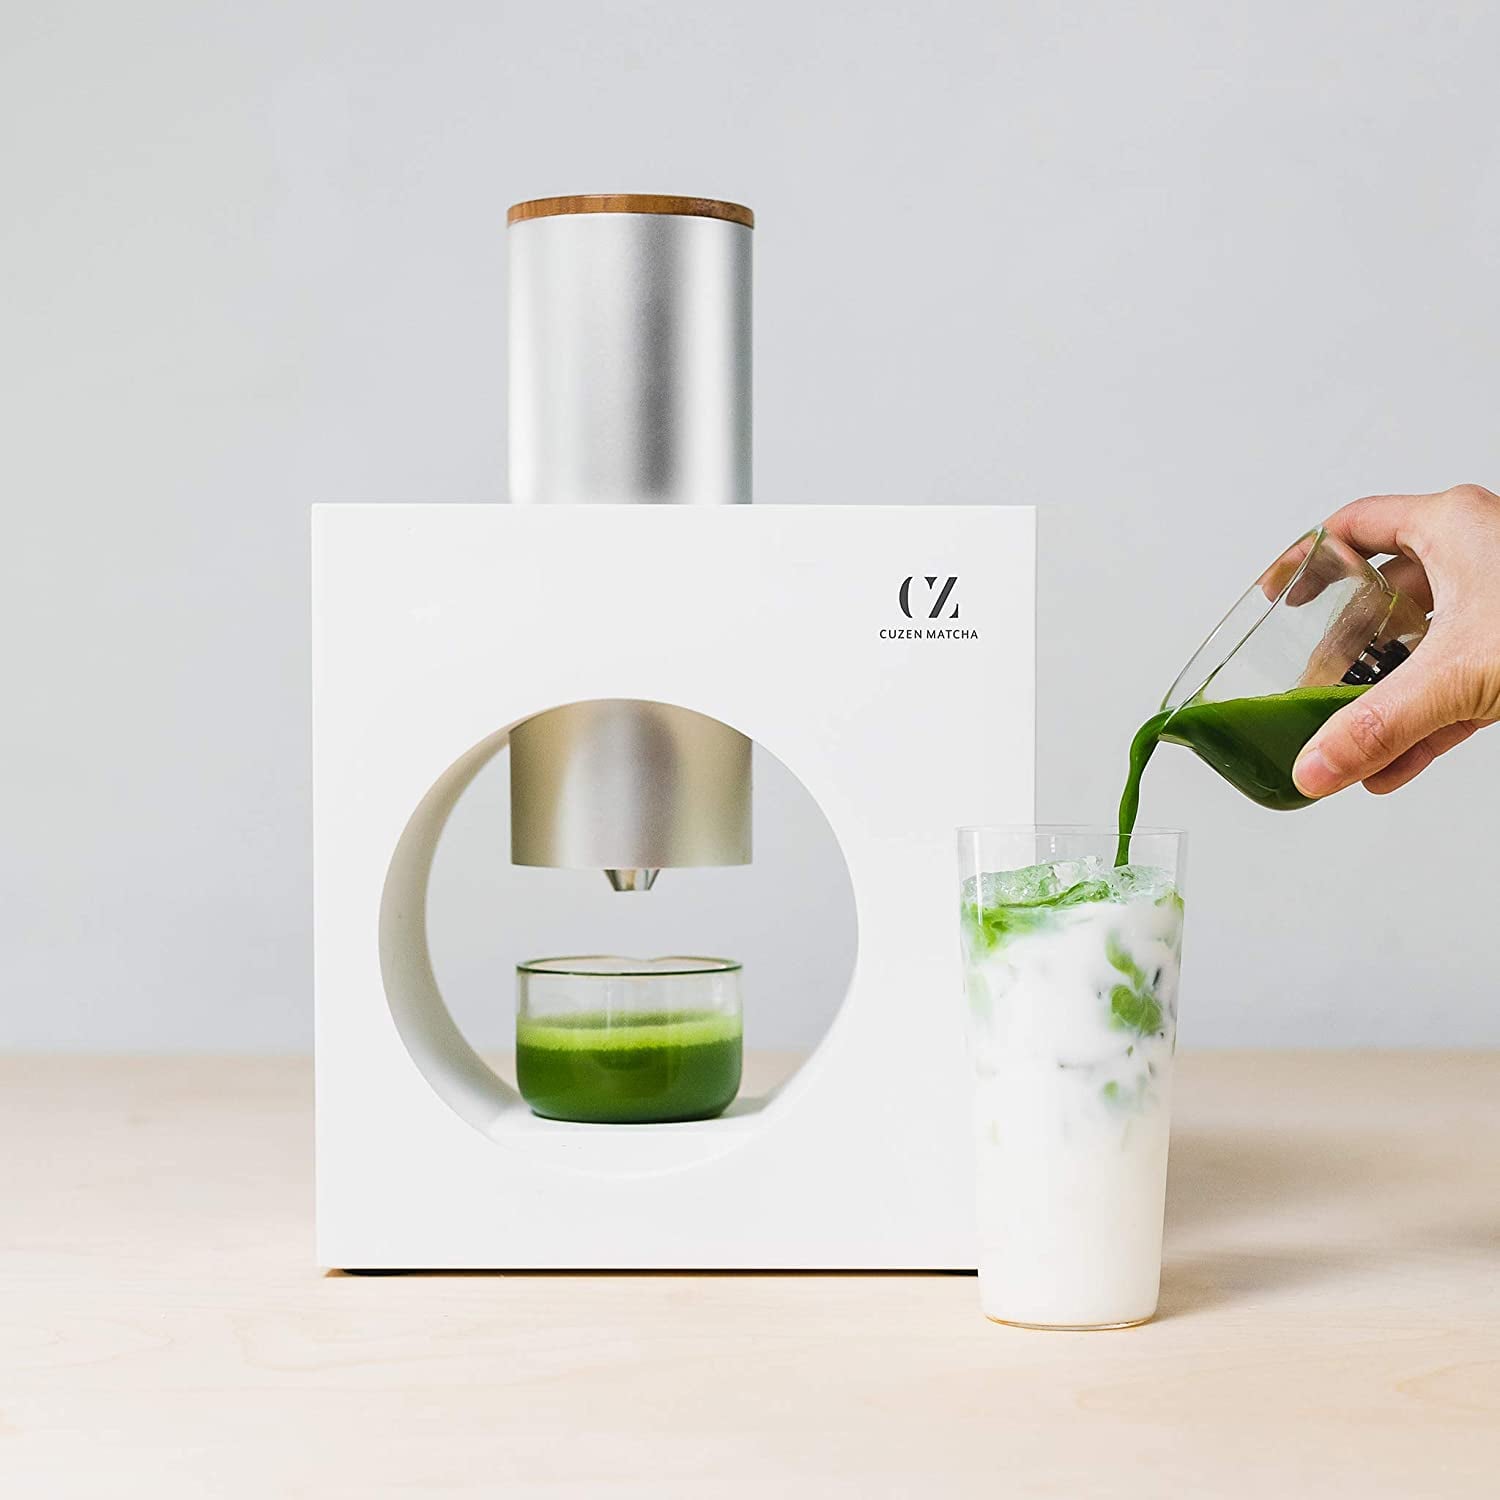 Cuzen Matcha Maker review: How to make matcha with the press of a